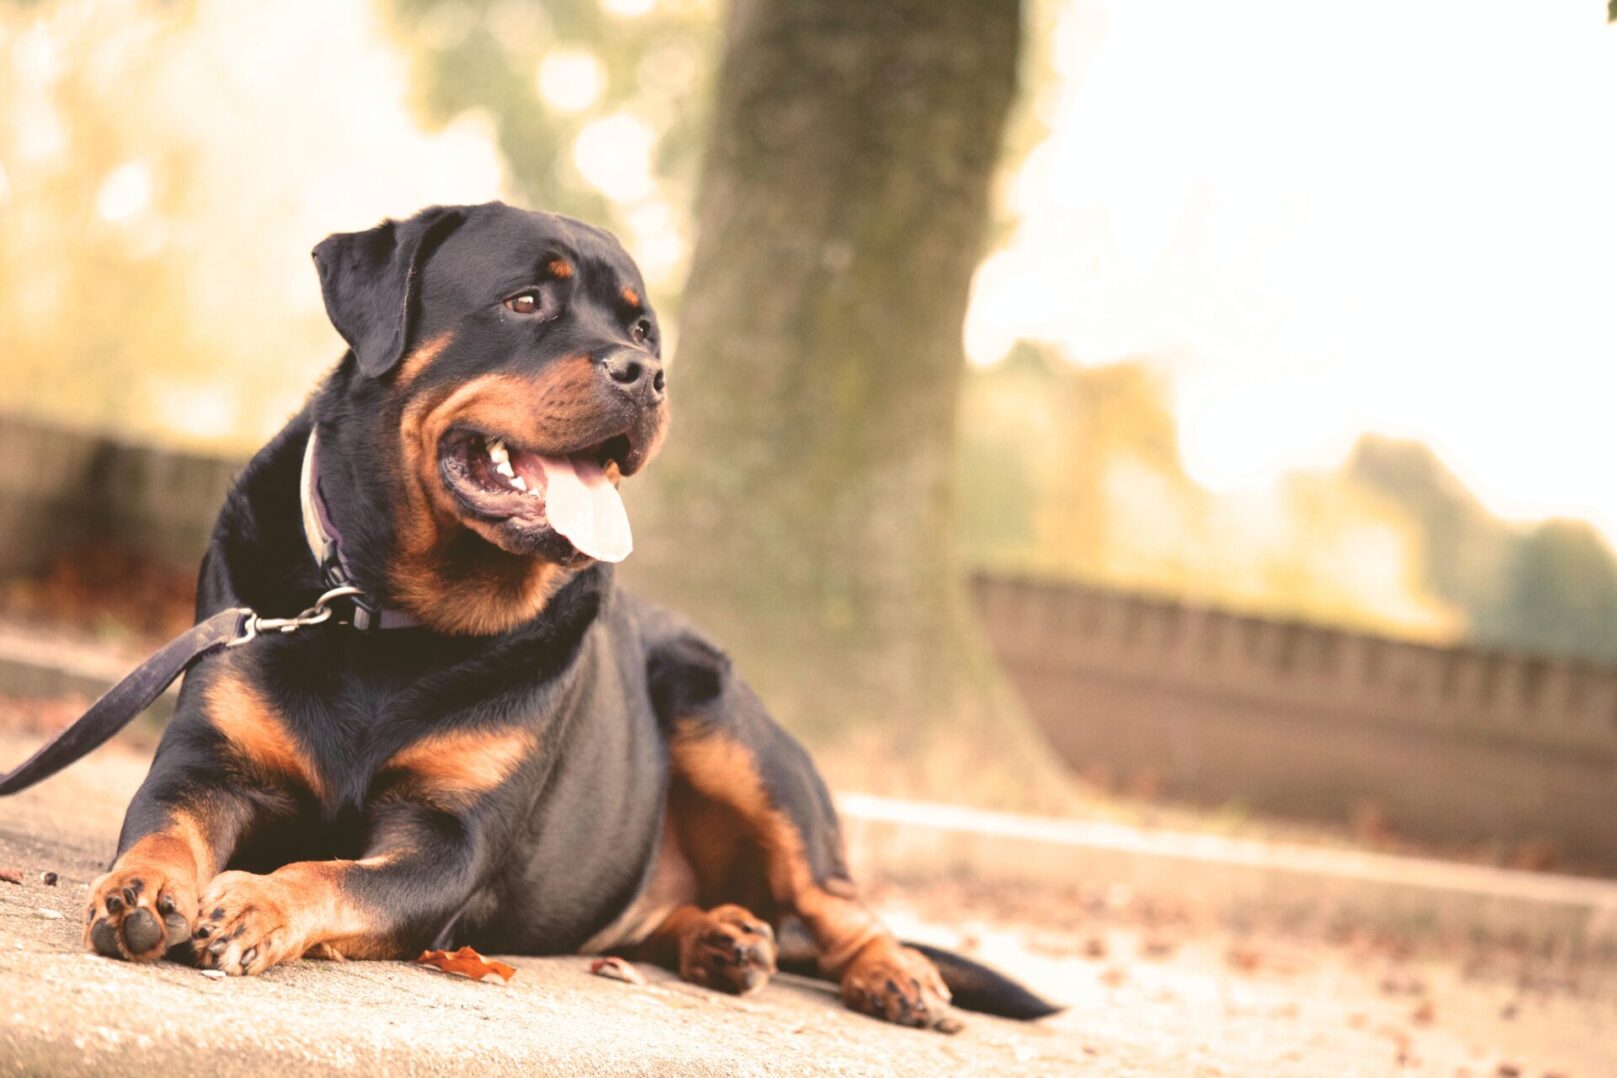 A rottweiler dog lays on the ground in a relaxed but alert pose with tongue out looking up and out of viewframe